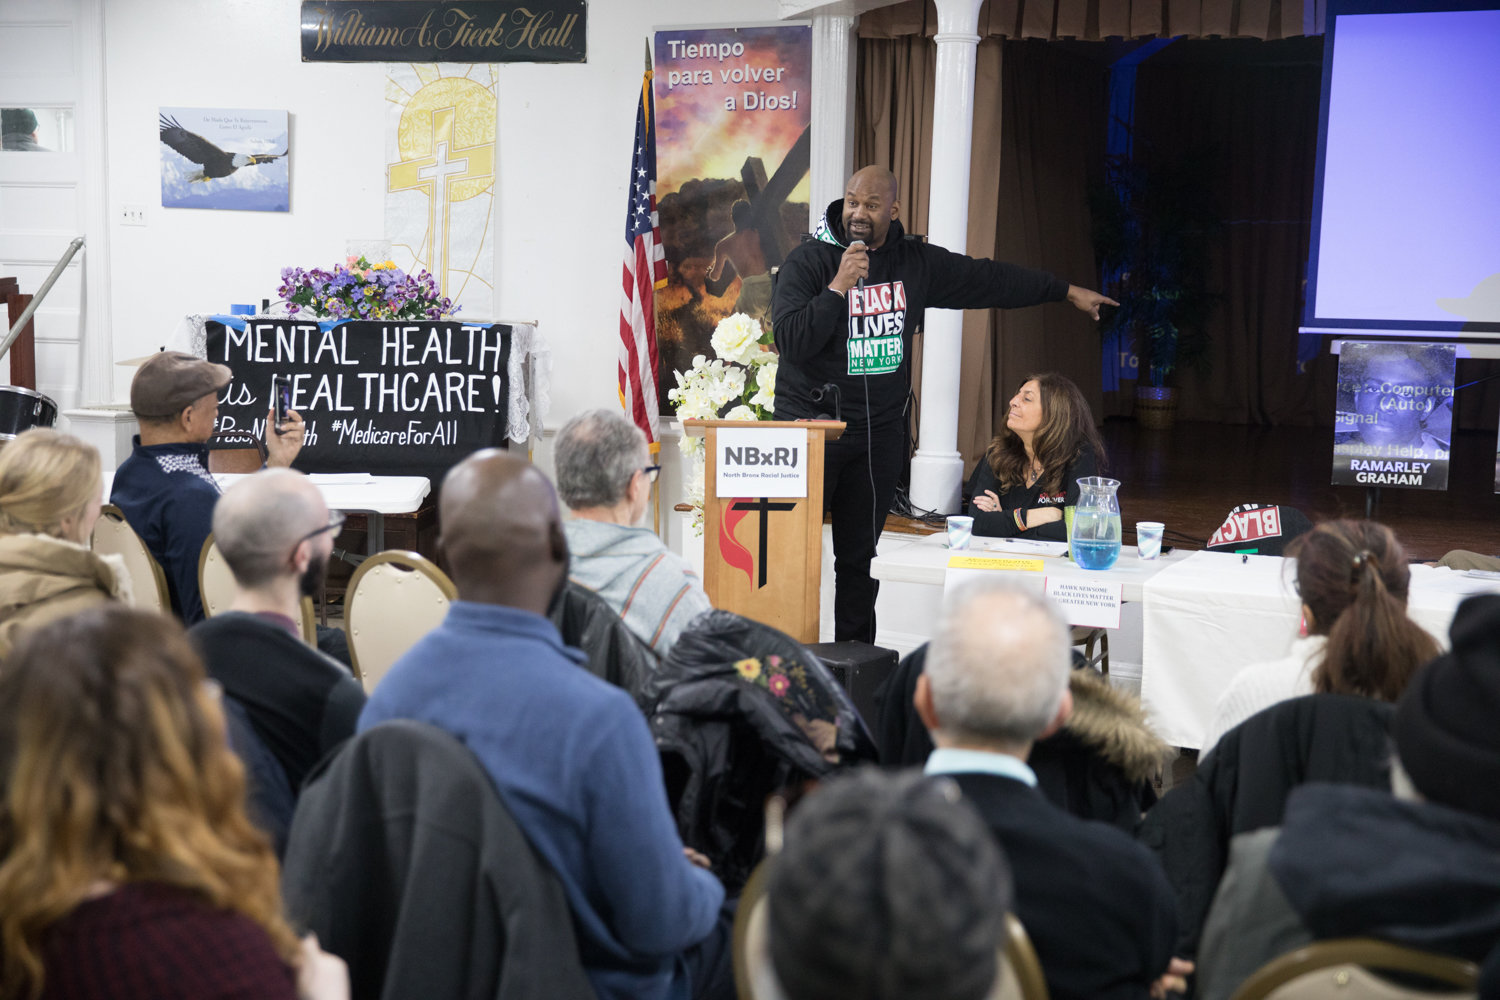 Black Lives Matter of Greater New York president Hawk Newsome speaks at a panel discussion, organized in part by North Bronx Racial Justice, on mental health and police activity in communities of color at St. Stephen’s United Methodist Church on Martin Luther King Jr. Day. Organizations like North Bronx Racial Justice have had to adapt to working online in response to the pandemic.